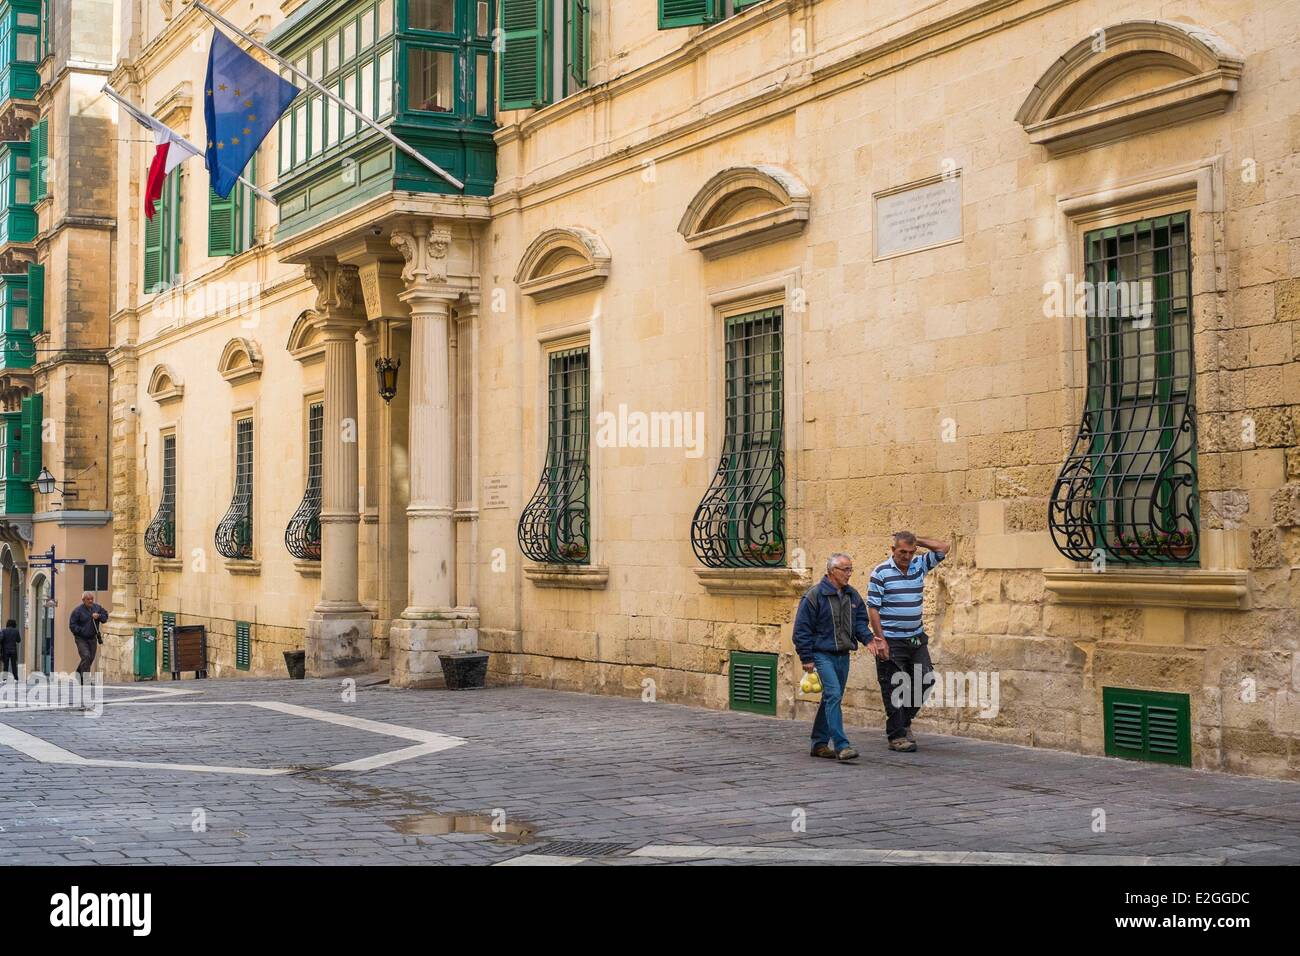 Malta La Valletta listed as World Heritage by UNESCO Palazzo Parisio once occupied by Napoleon Bonaparte now Ministry for Foreign Affairs Stock Photo